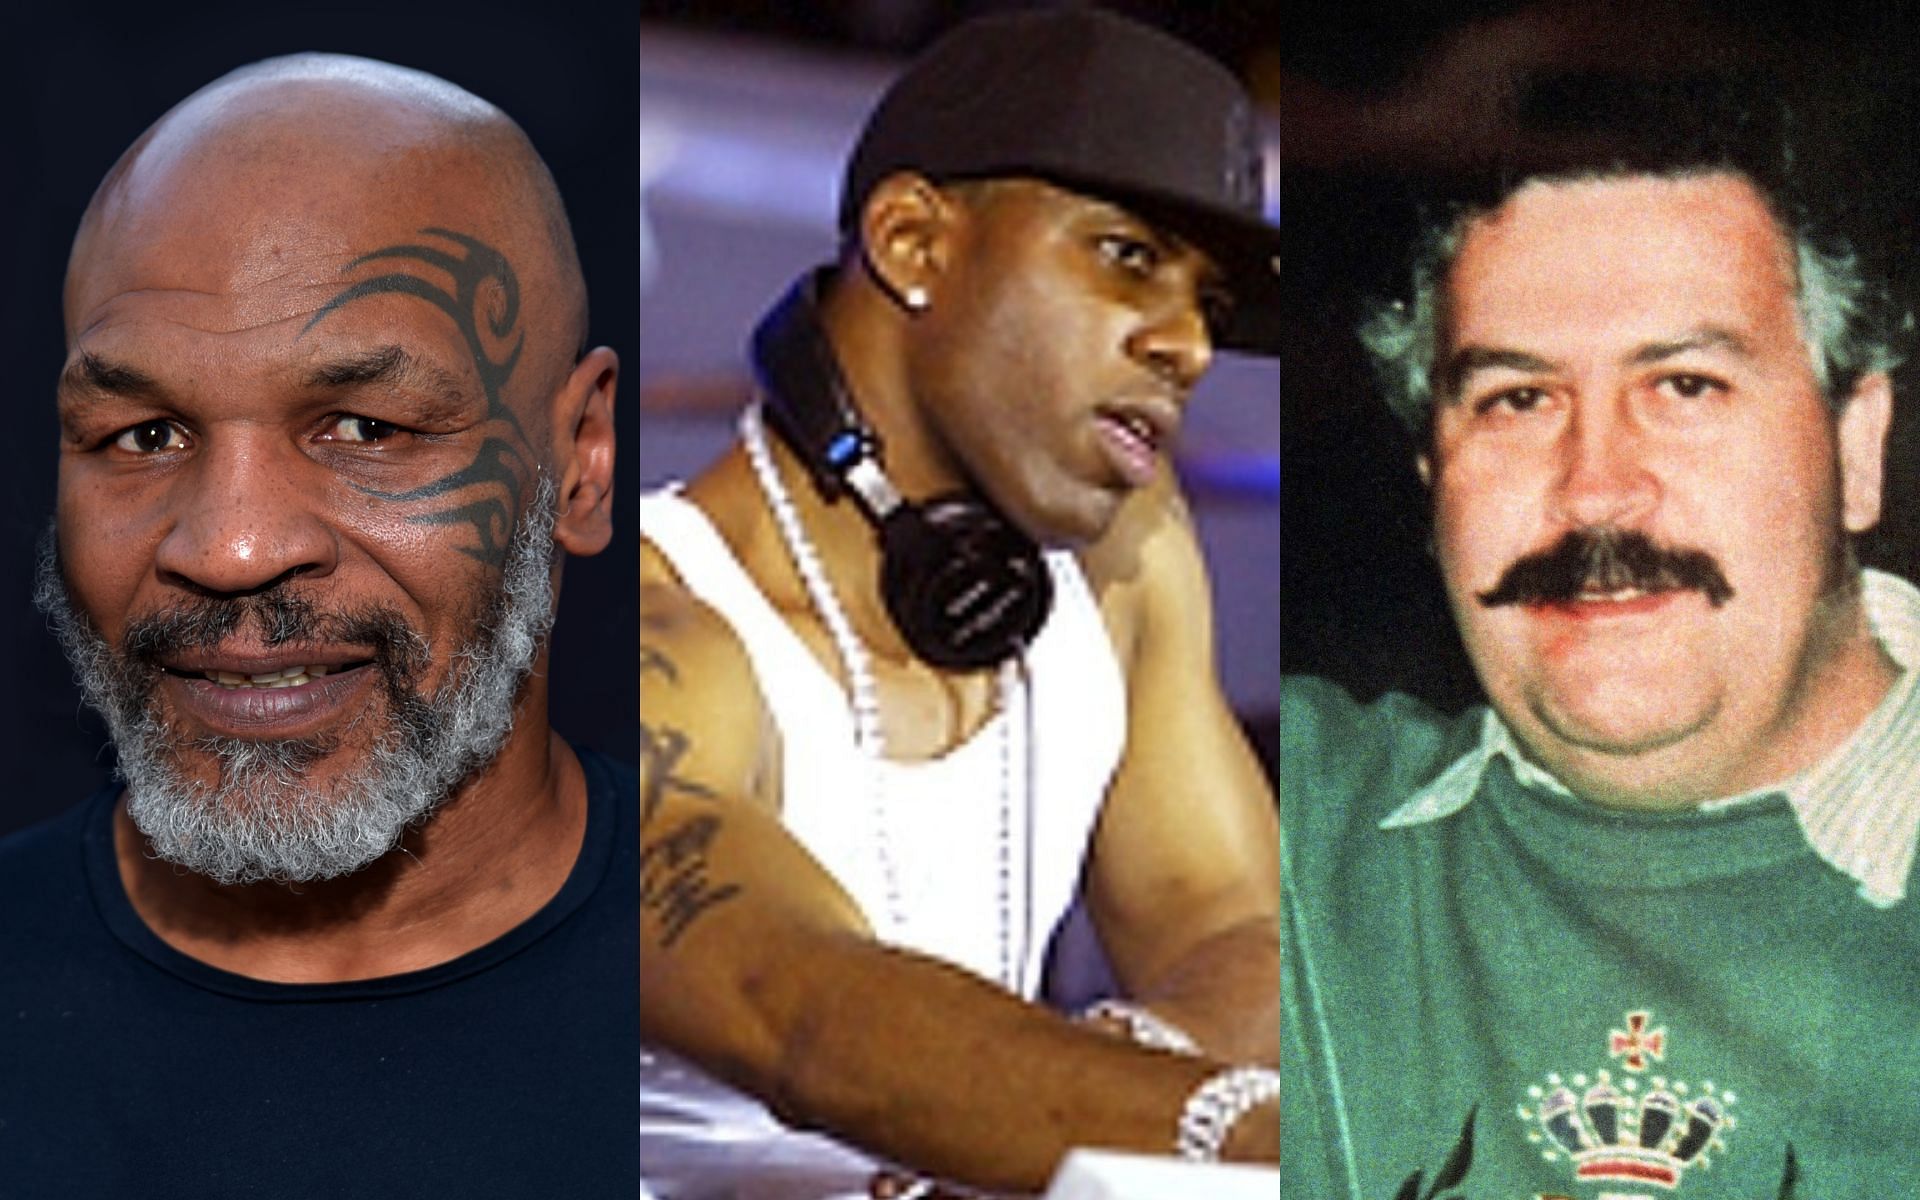 [L-R] Mike Tyson, DJ Whoo Kid and Pablo Escobar